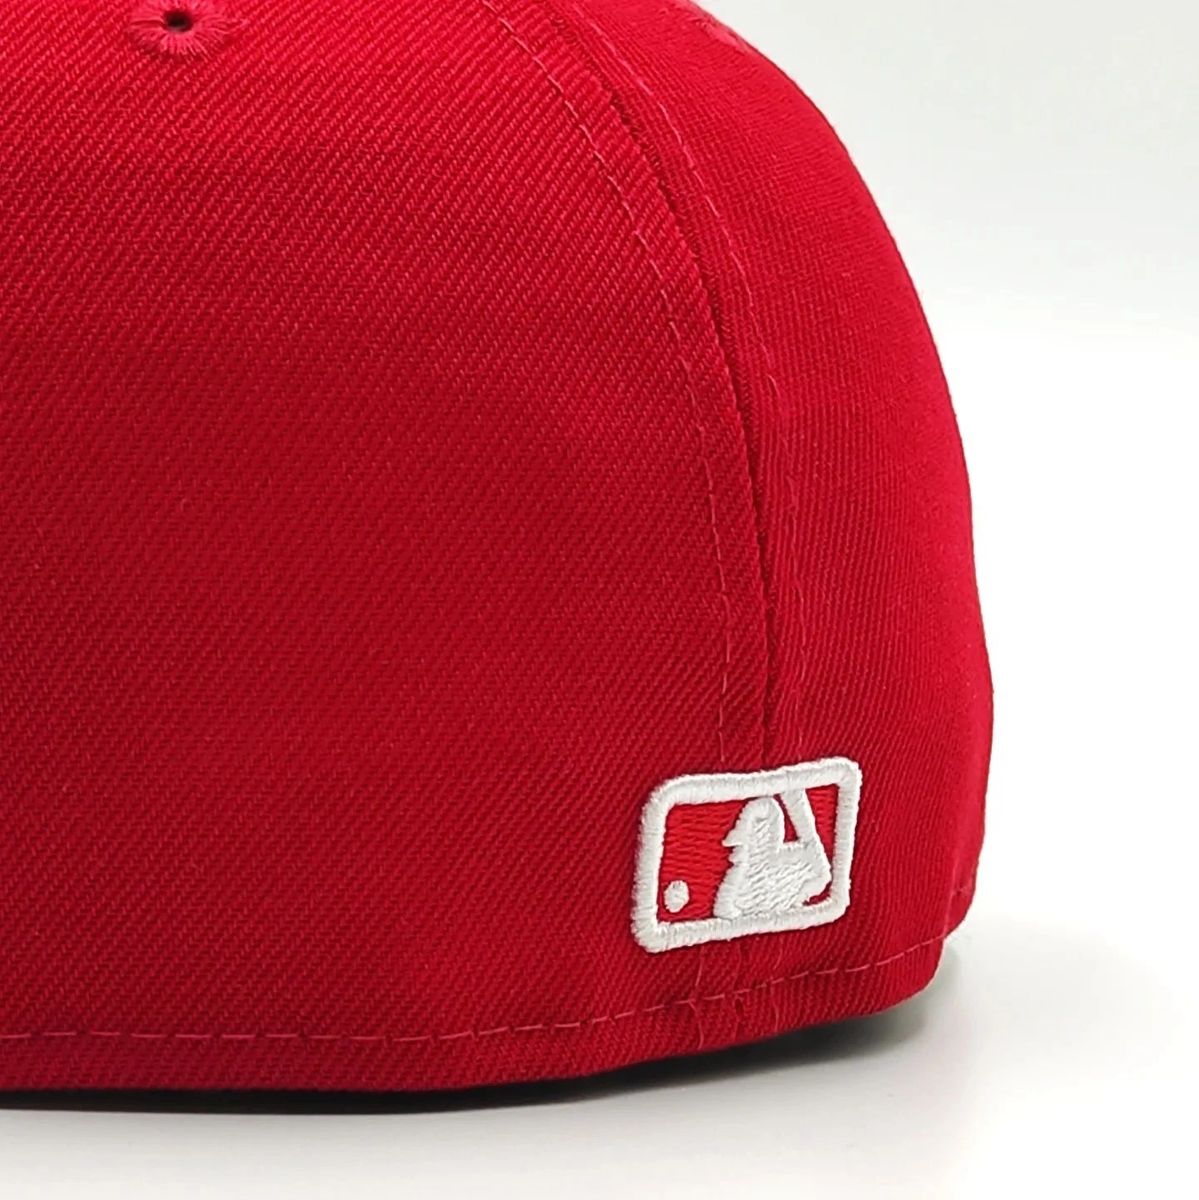 New Era Giants of san Francisco 59 fifty red